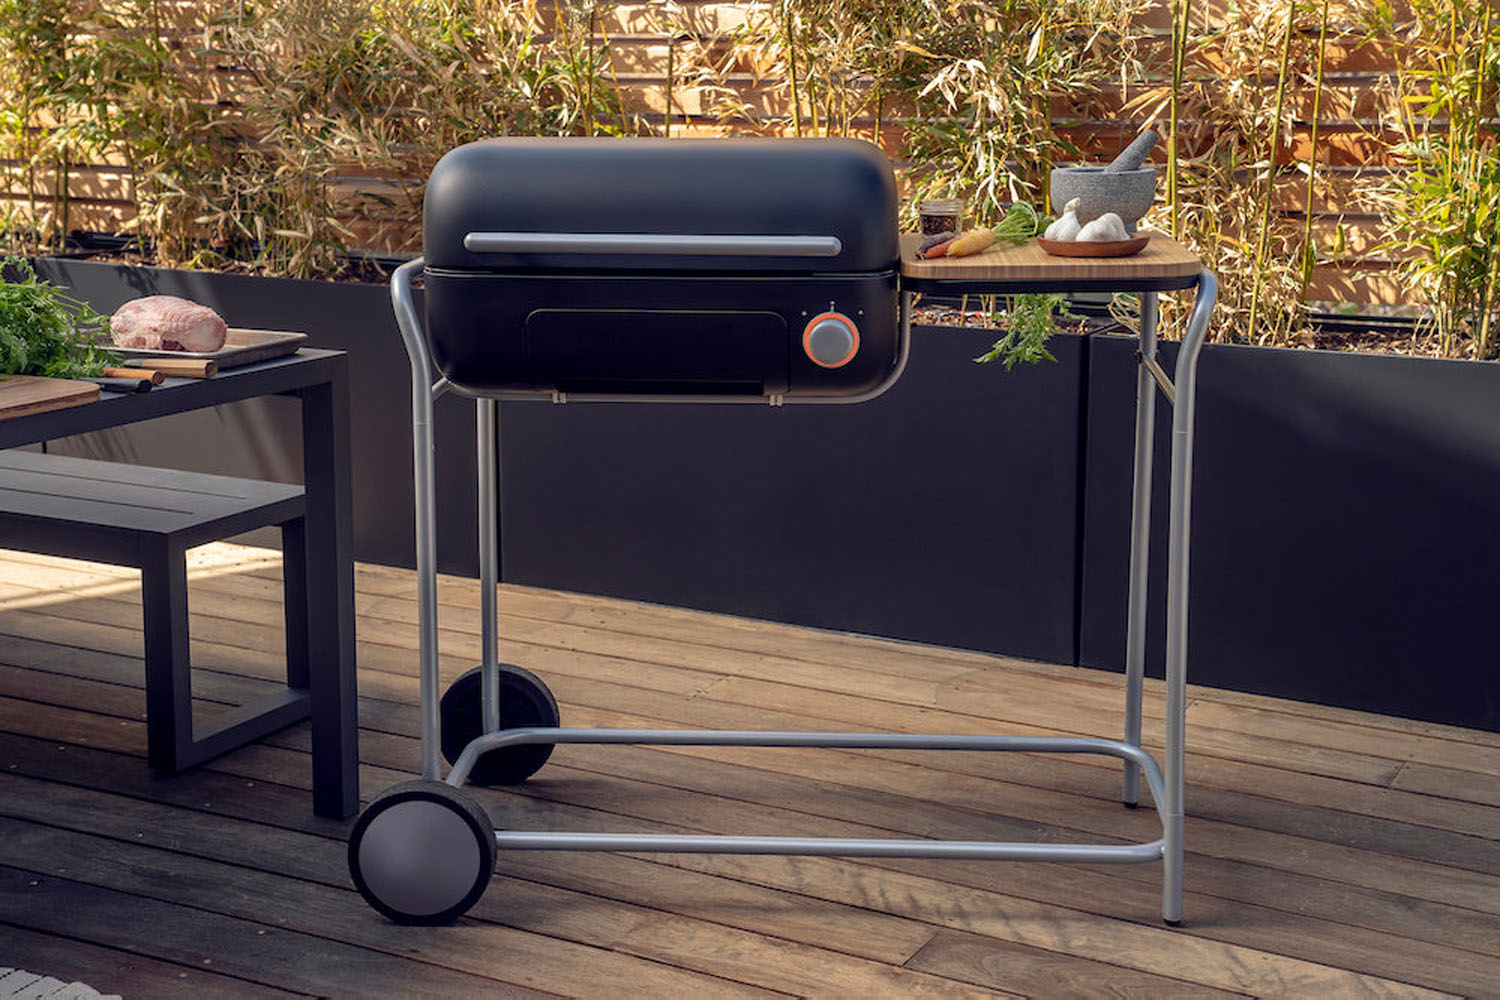 A charcoal spark grill on a deck